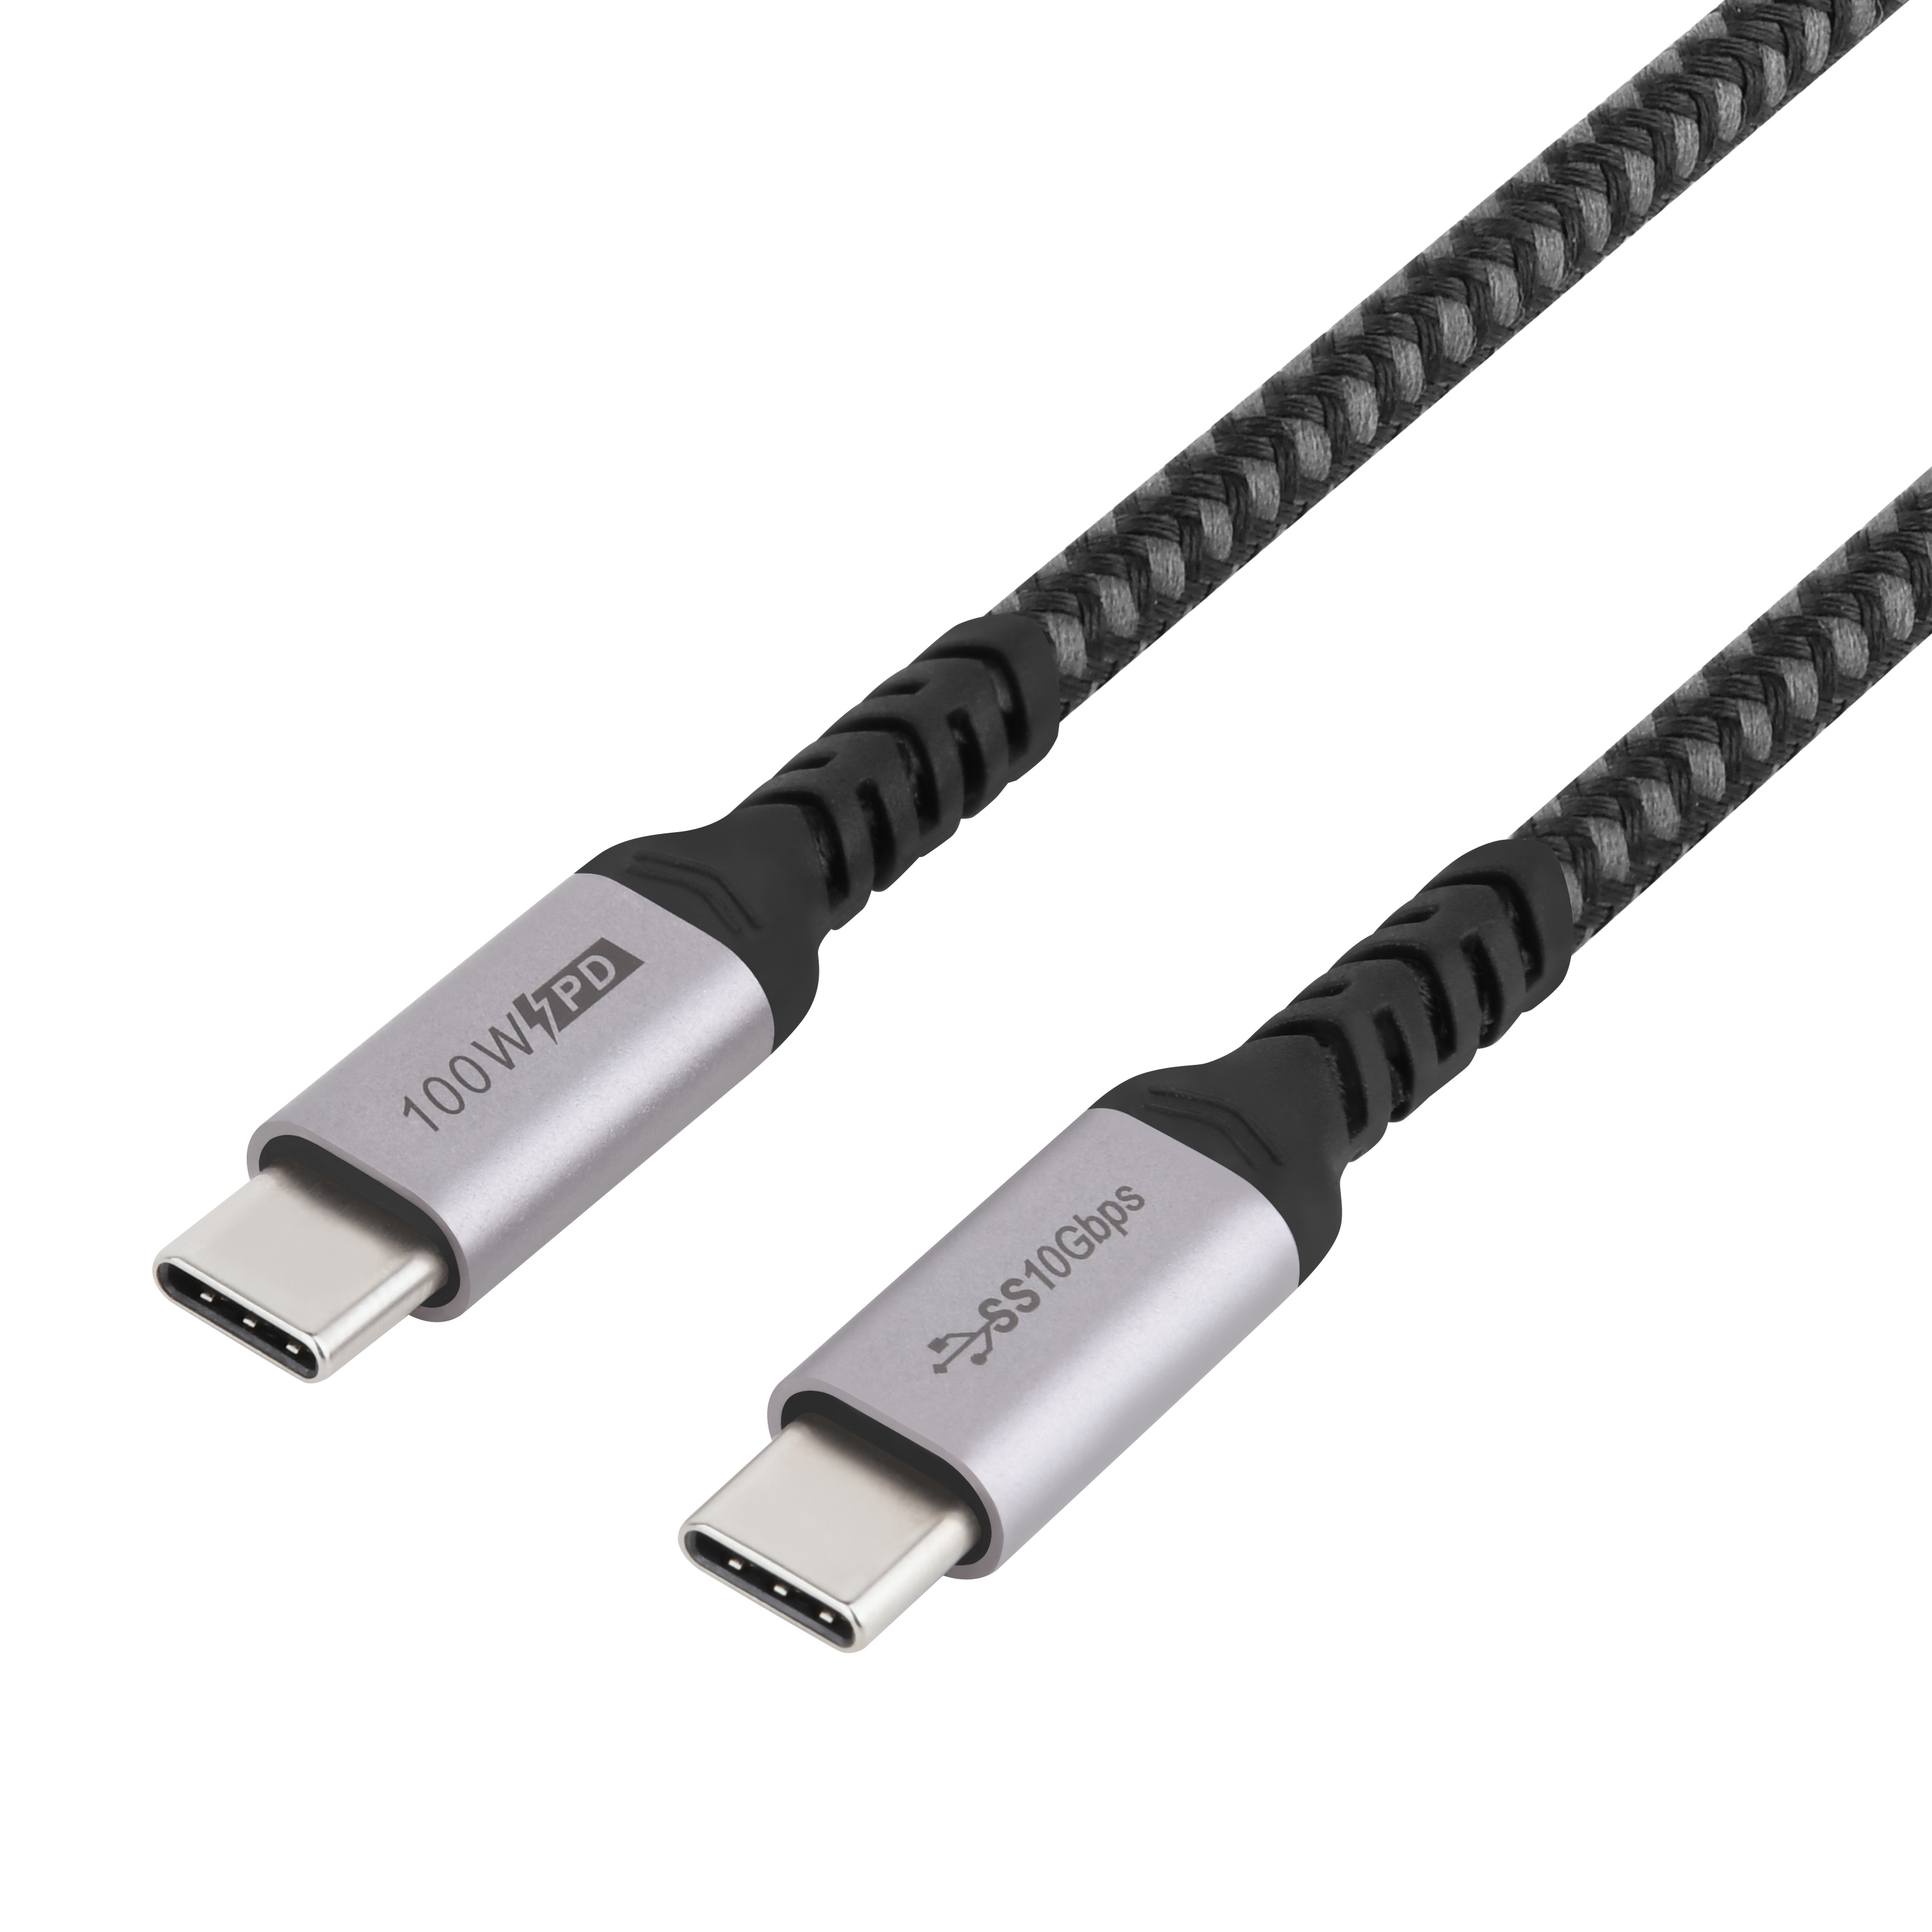 10G USB C to USB C Cable